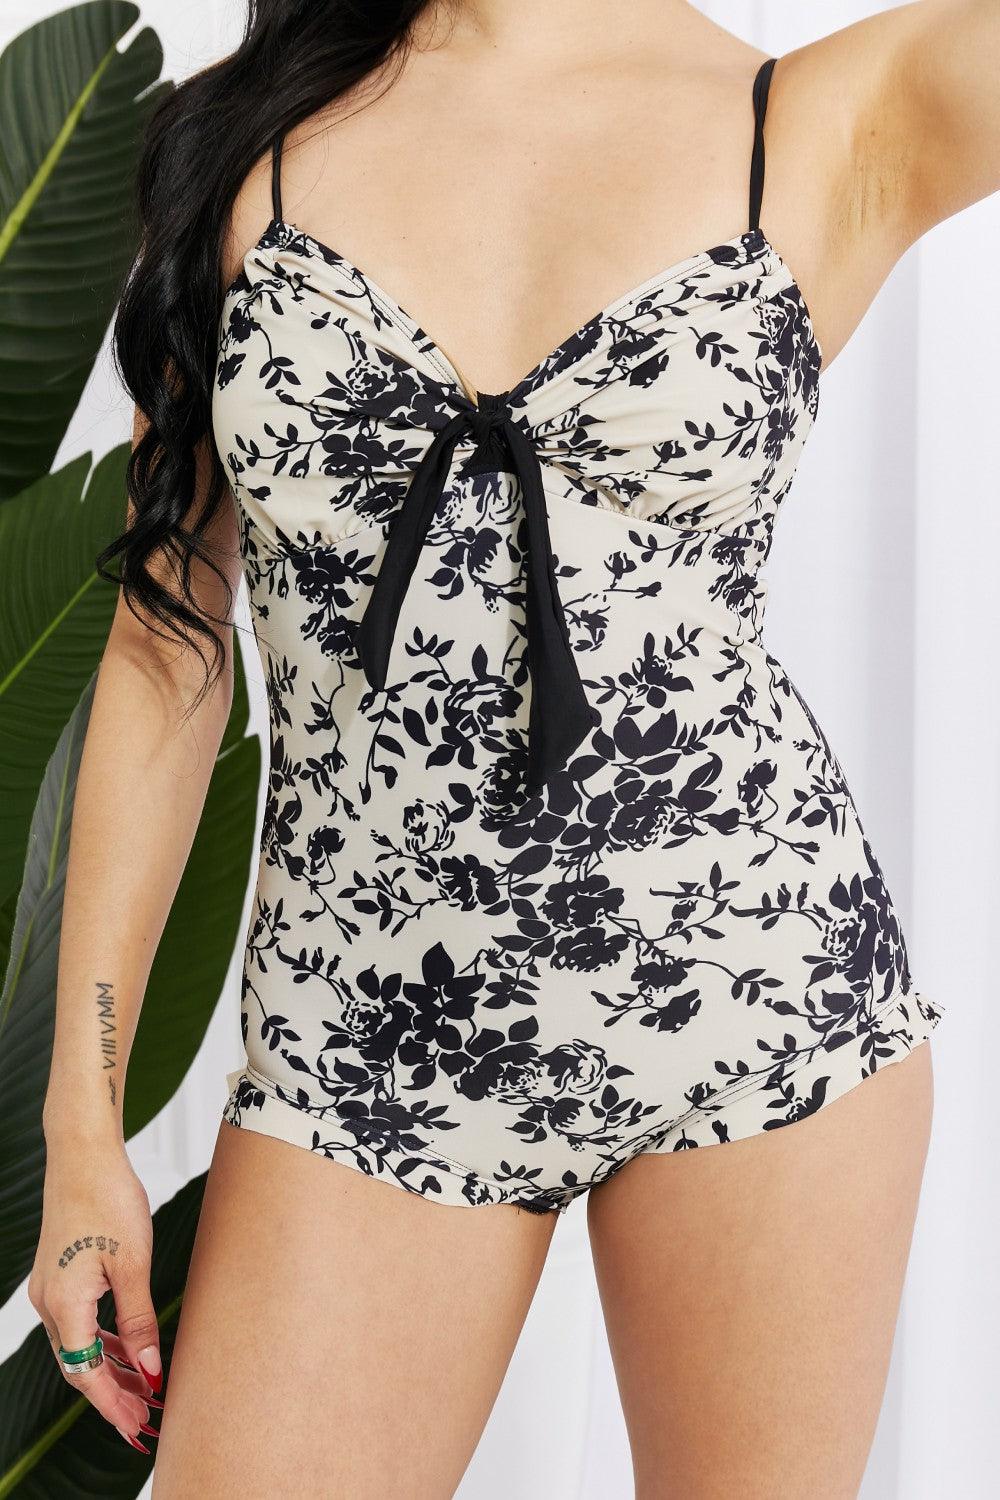 Marina West Swim Côte d'Azur Ruffle Trim One-Piece Swimsuit - God's Girl Gifts And Apparel